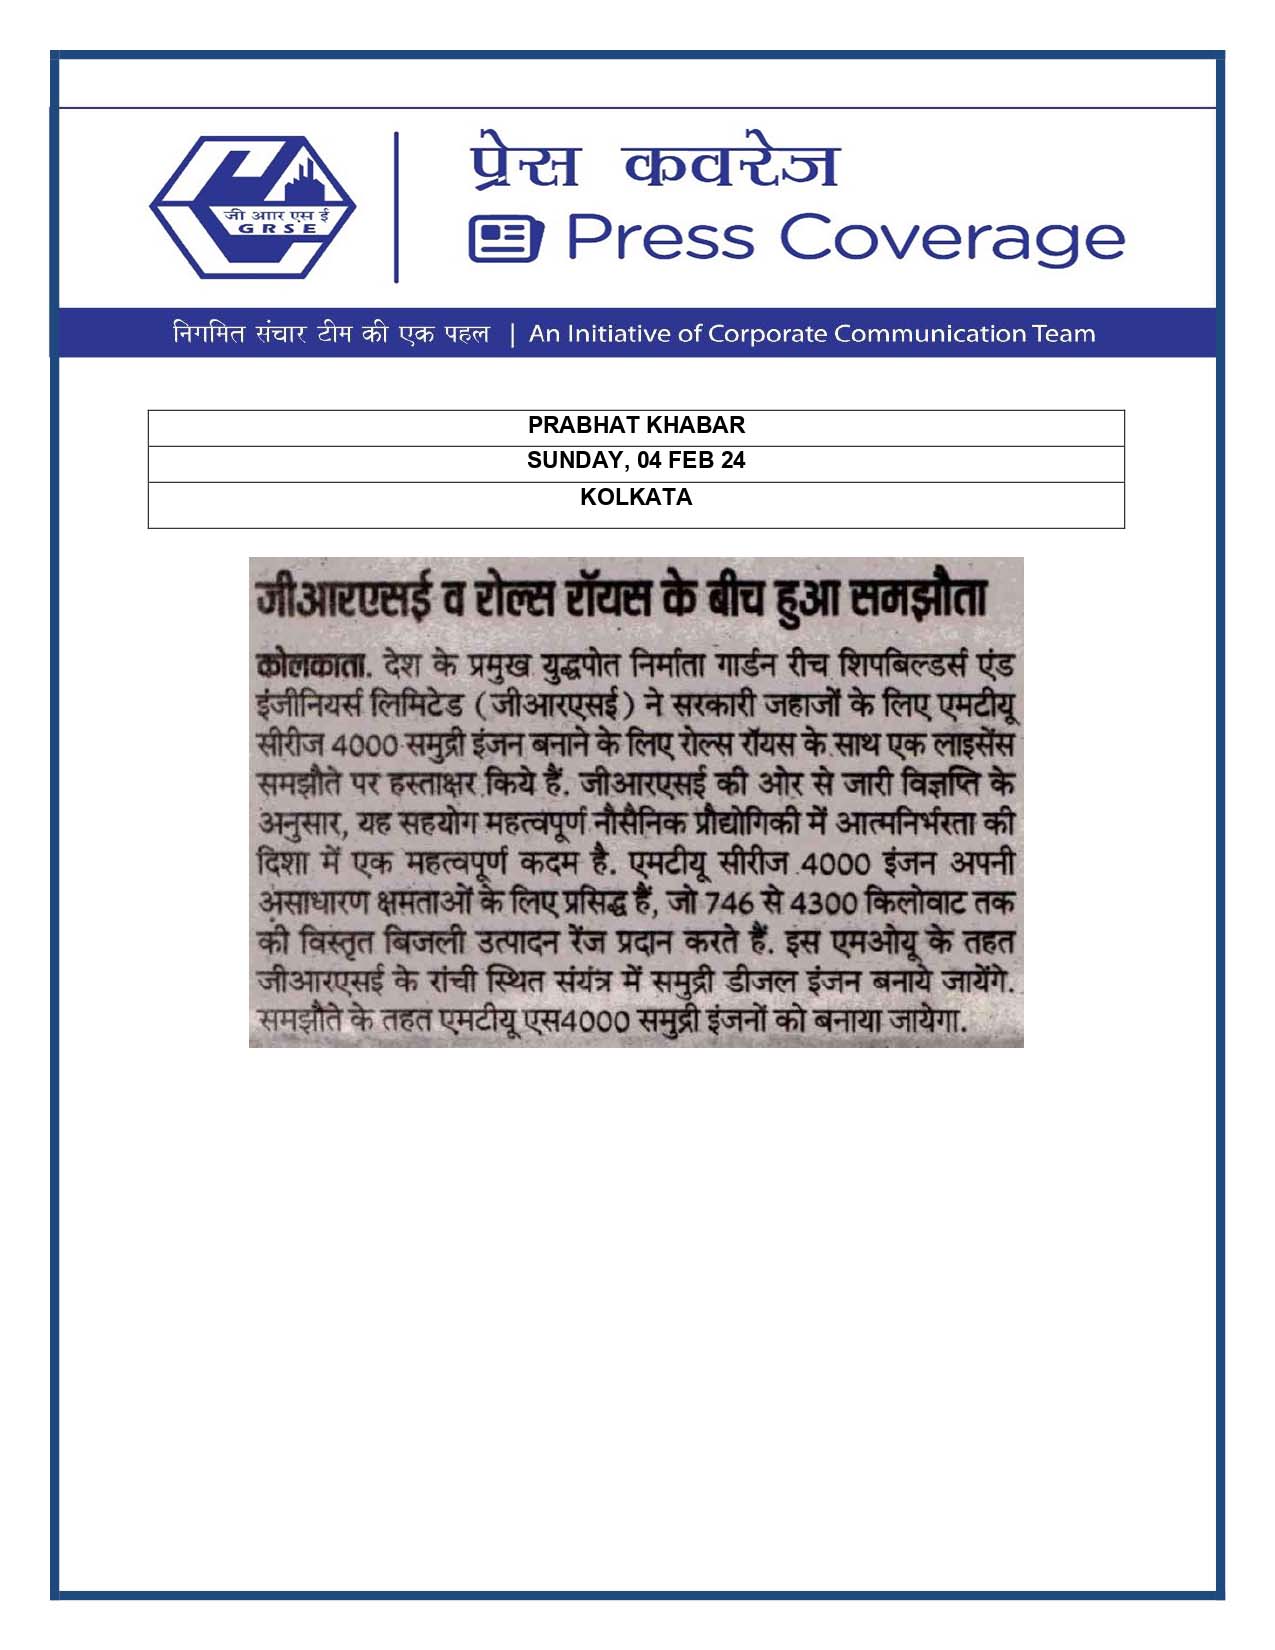 Press Coverage : Prabhat Khabar, 04 Feb 24 : GRSE and Rolls-Royce inks pact